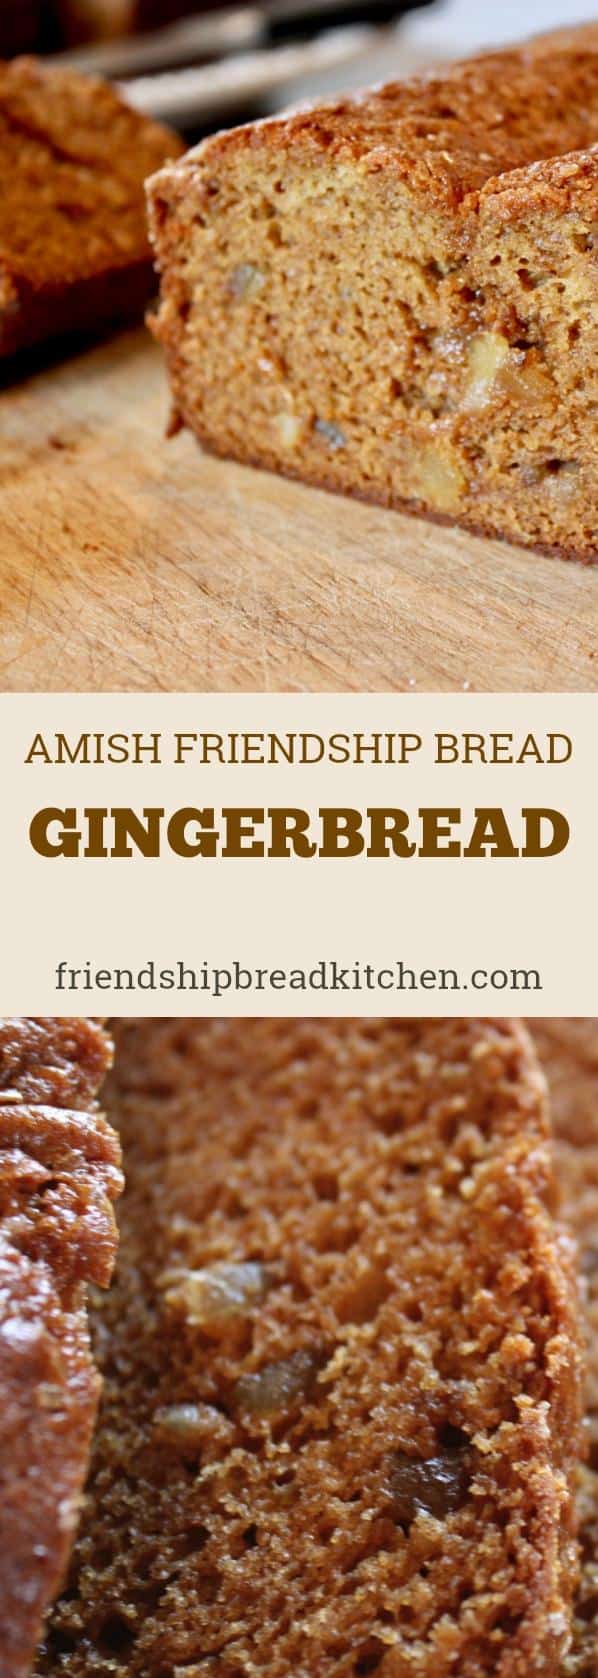  Come warm your soul with our cozy and aromatic Amish Friendship Gingerbread.